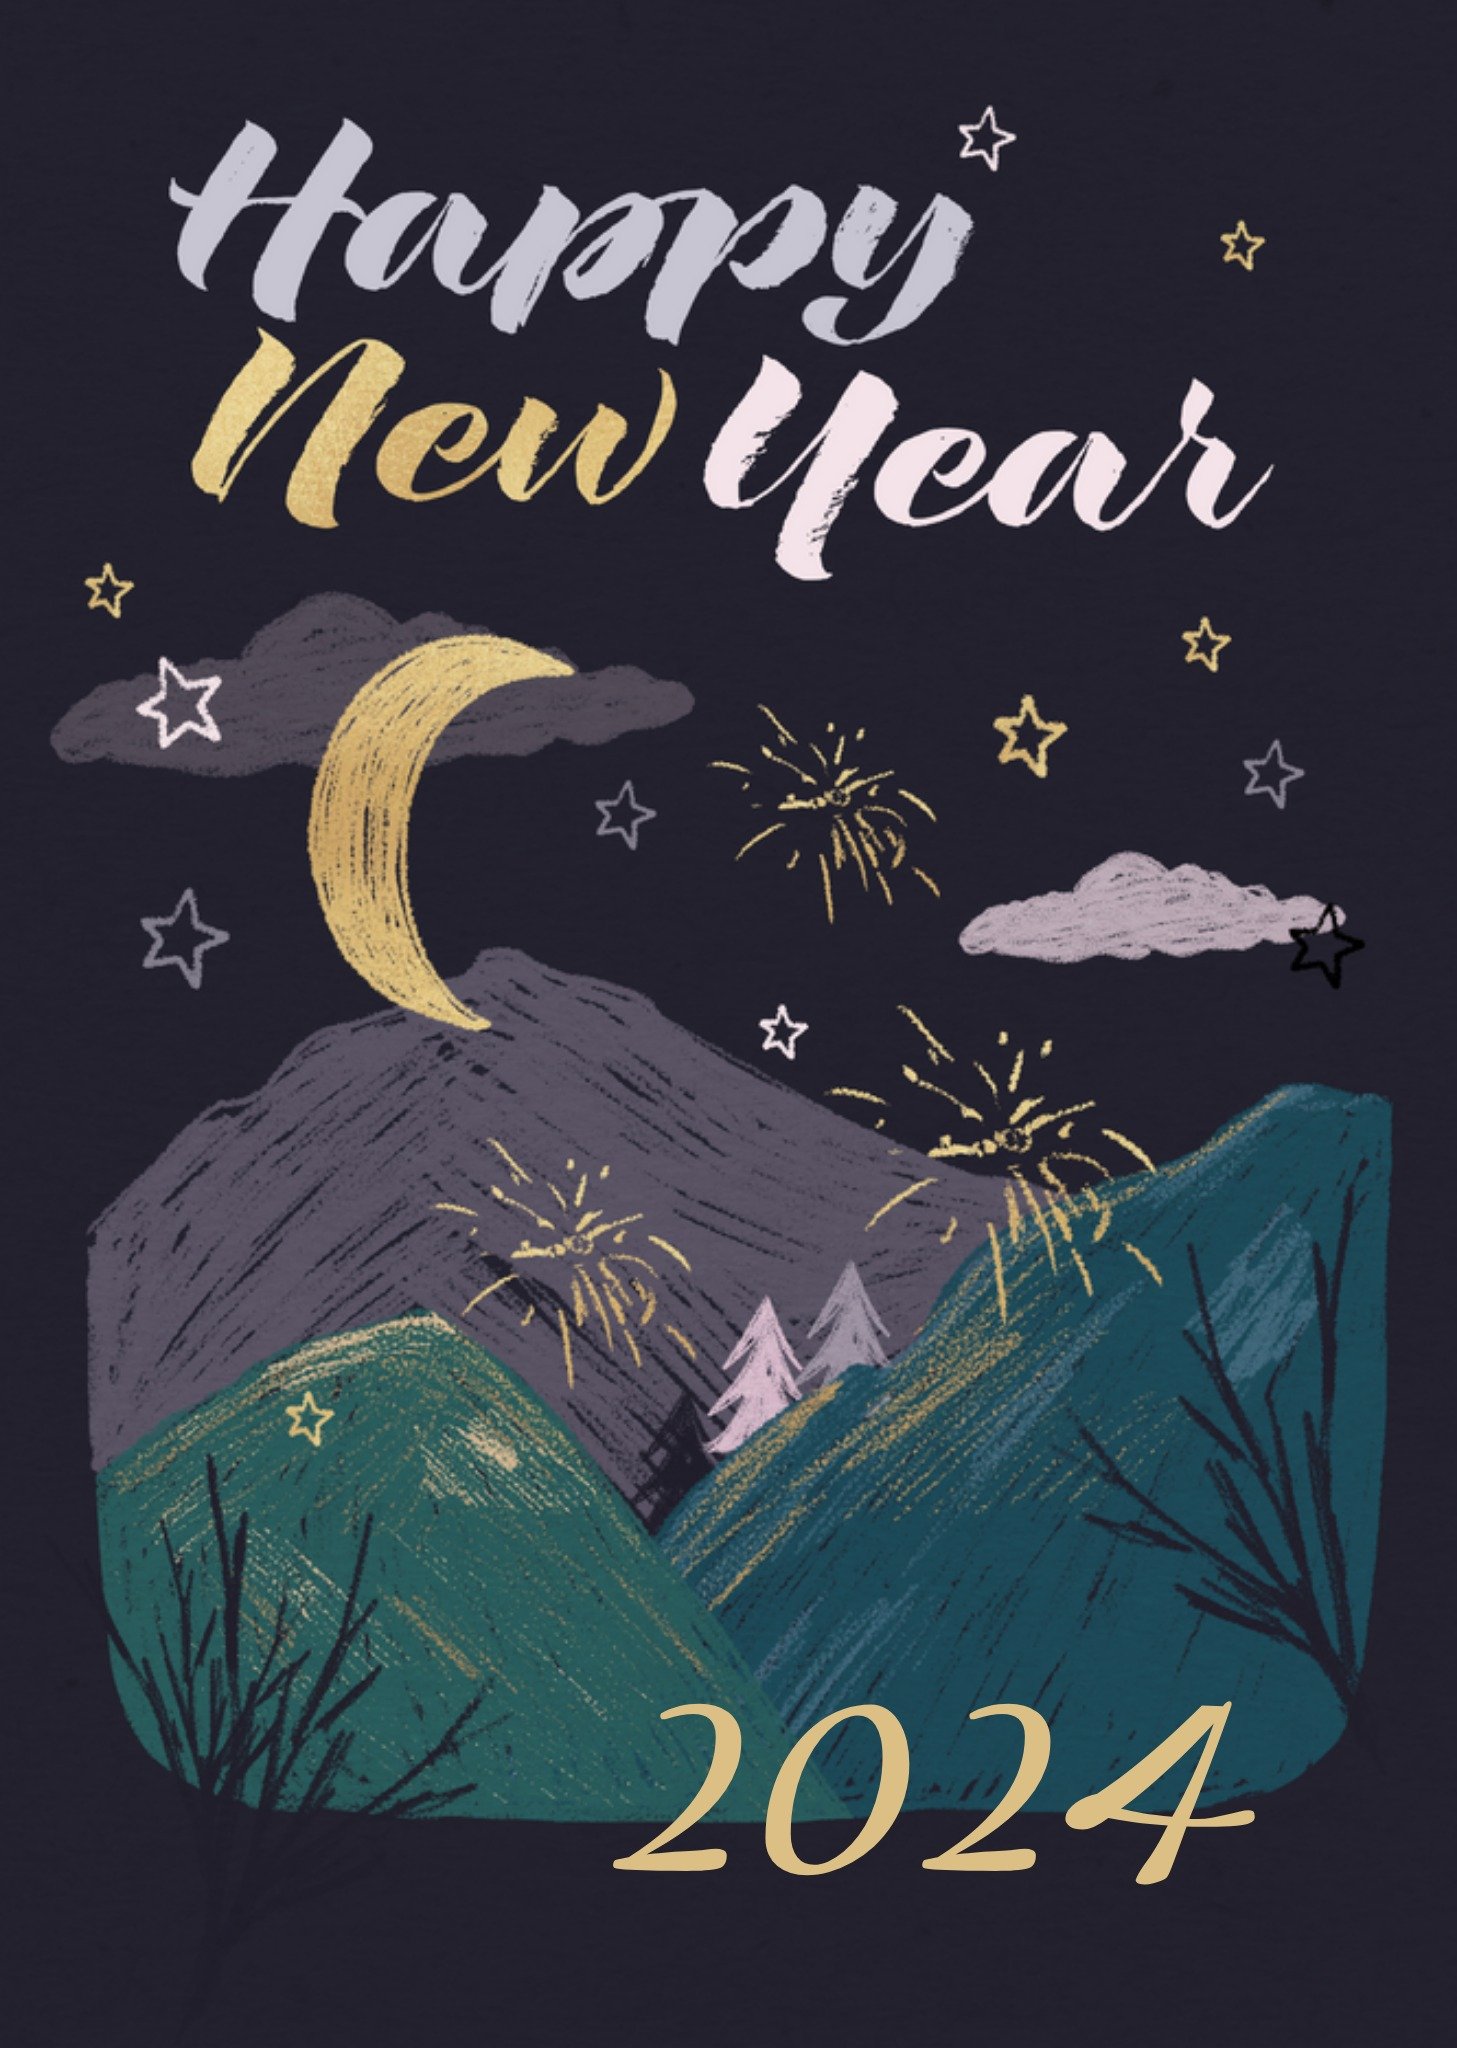 Moonpig Cosmic Mysterious Illustrated Crescent Moon Fireworks Mountains Night Scene New Year Card Ec